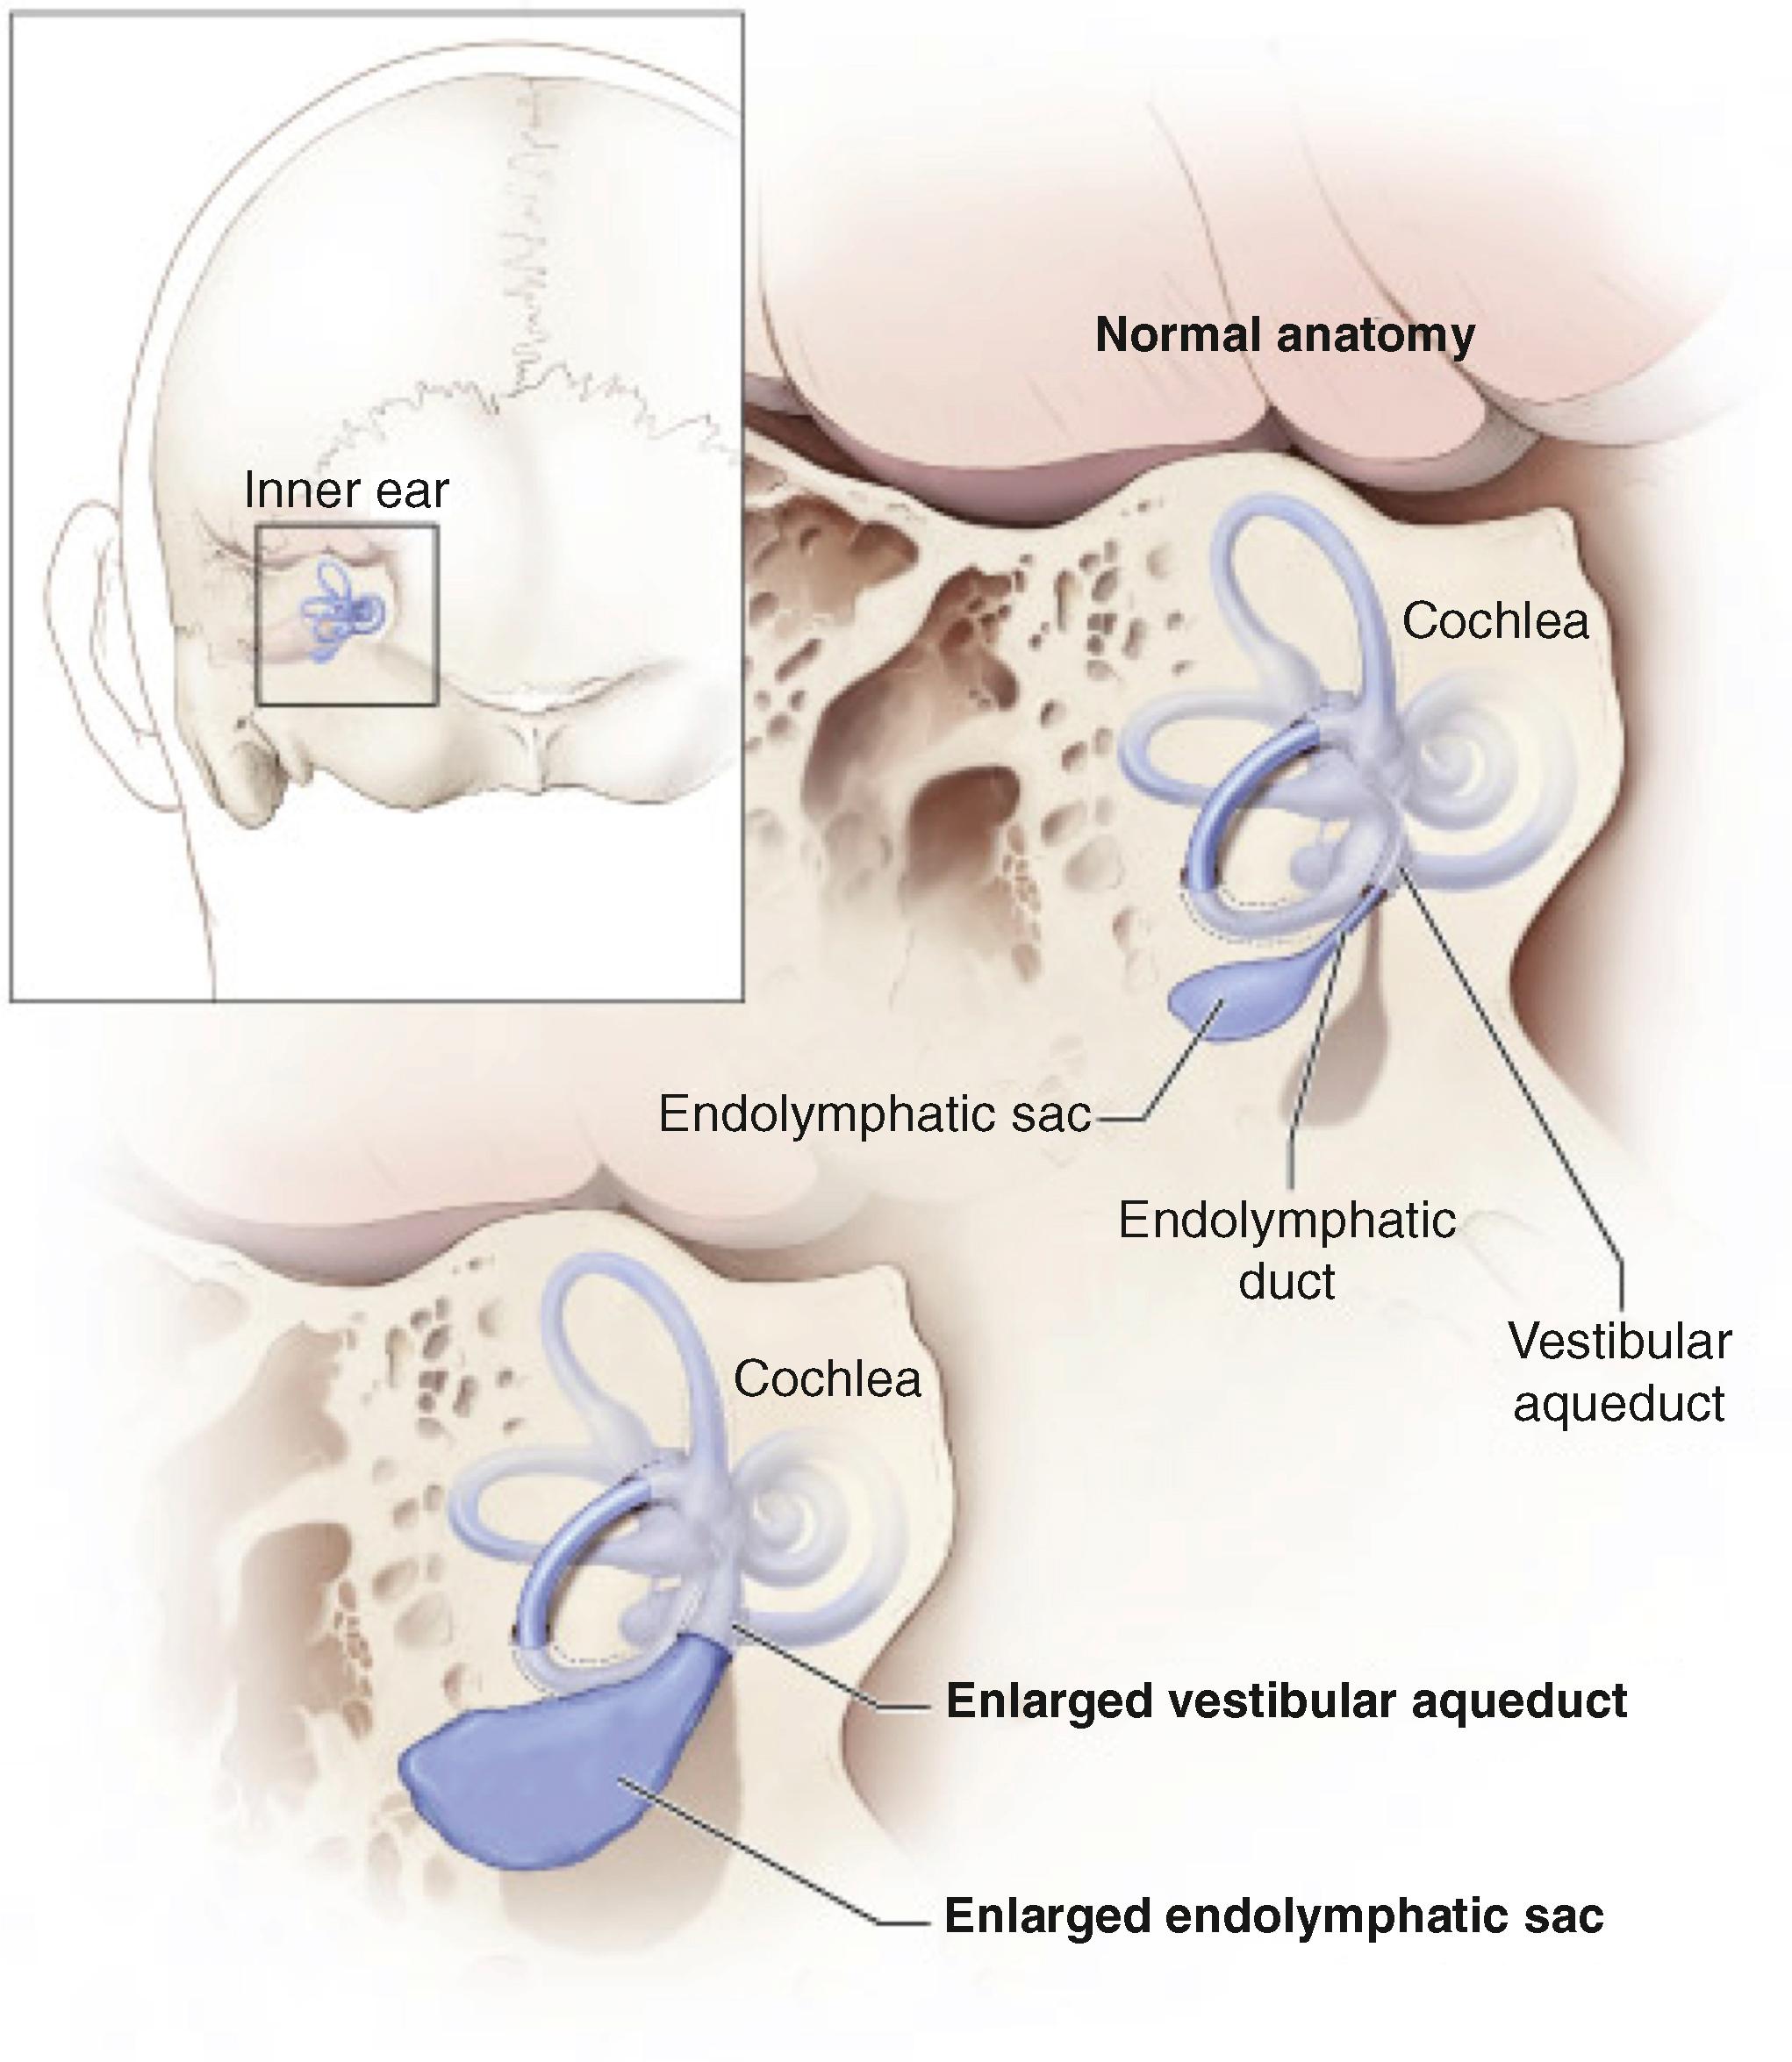 Fig. 14.2, Schematic illustration of an enlarged vestibular aqueduct and endolymphatic sac and duct.